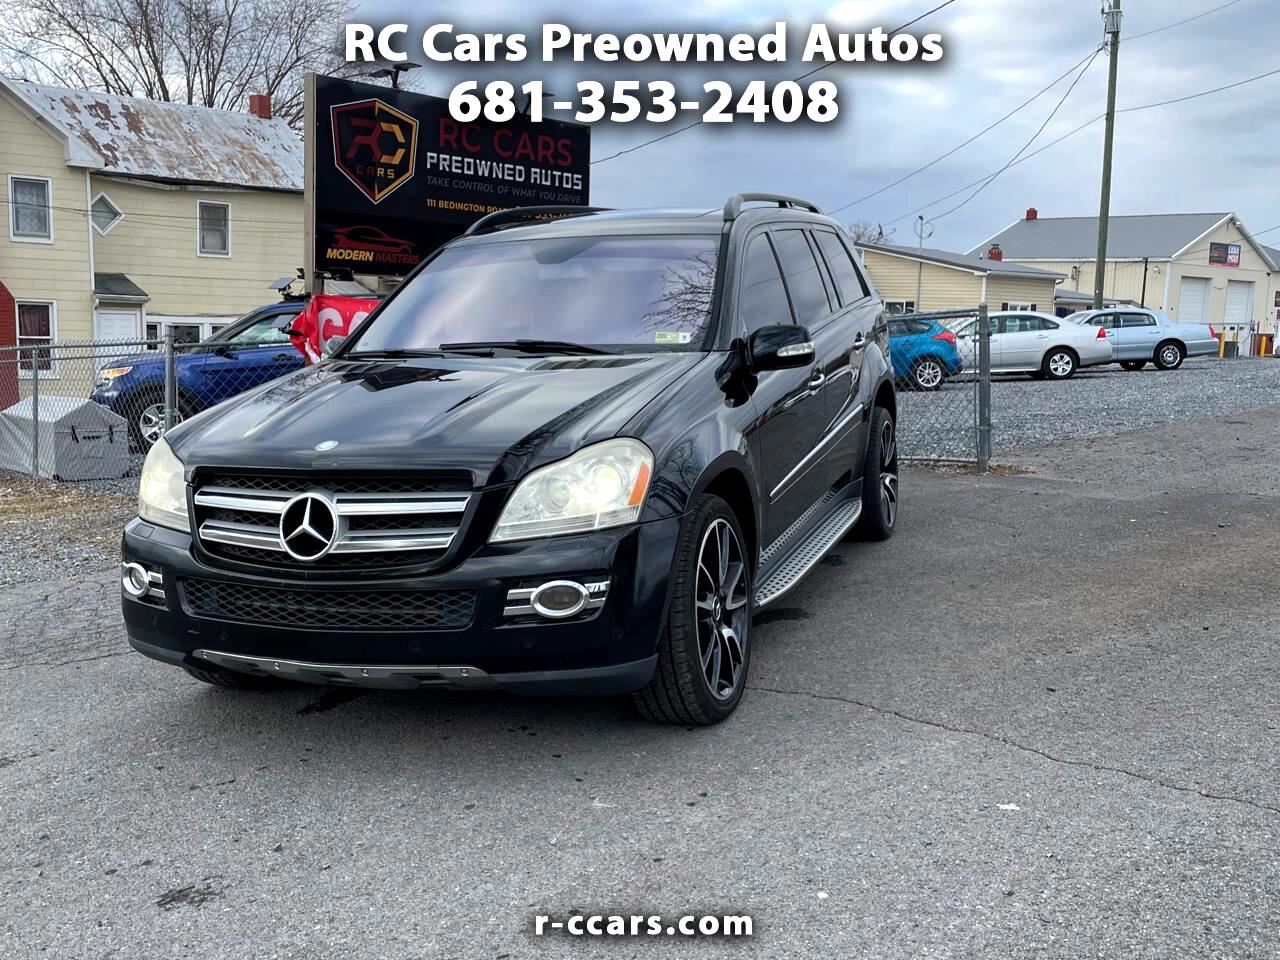 Used 2008 Mercedes-Benz GL-Class GL450 for Sale in Martinsburg WV 25404 RC  Cars Preowned Autos